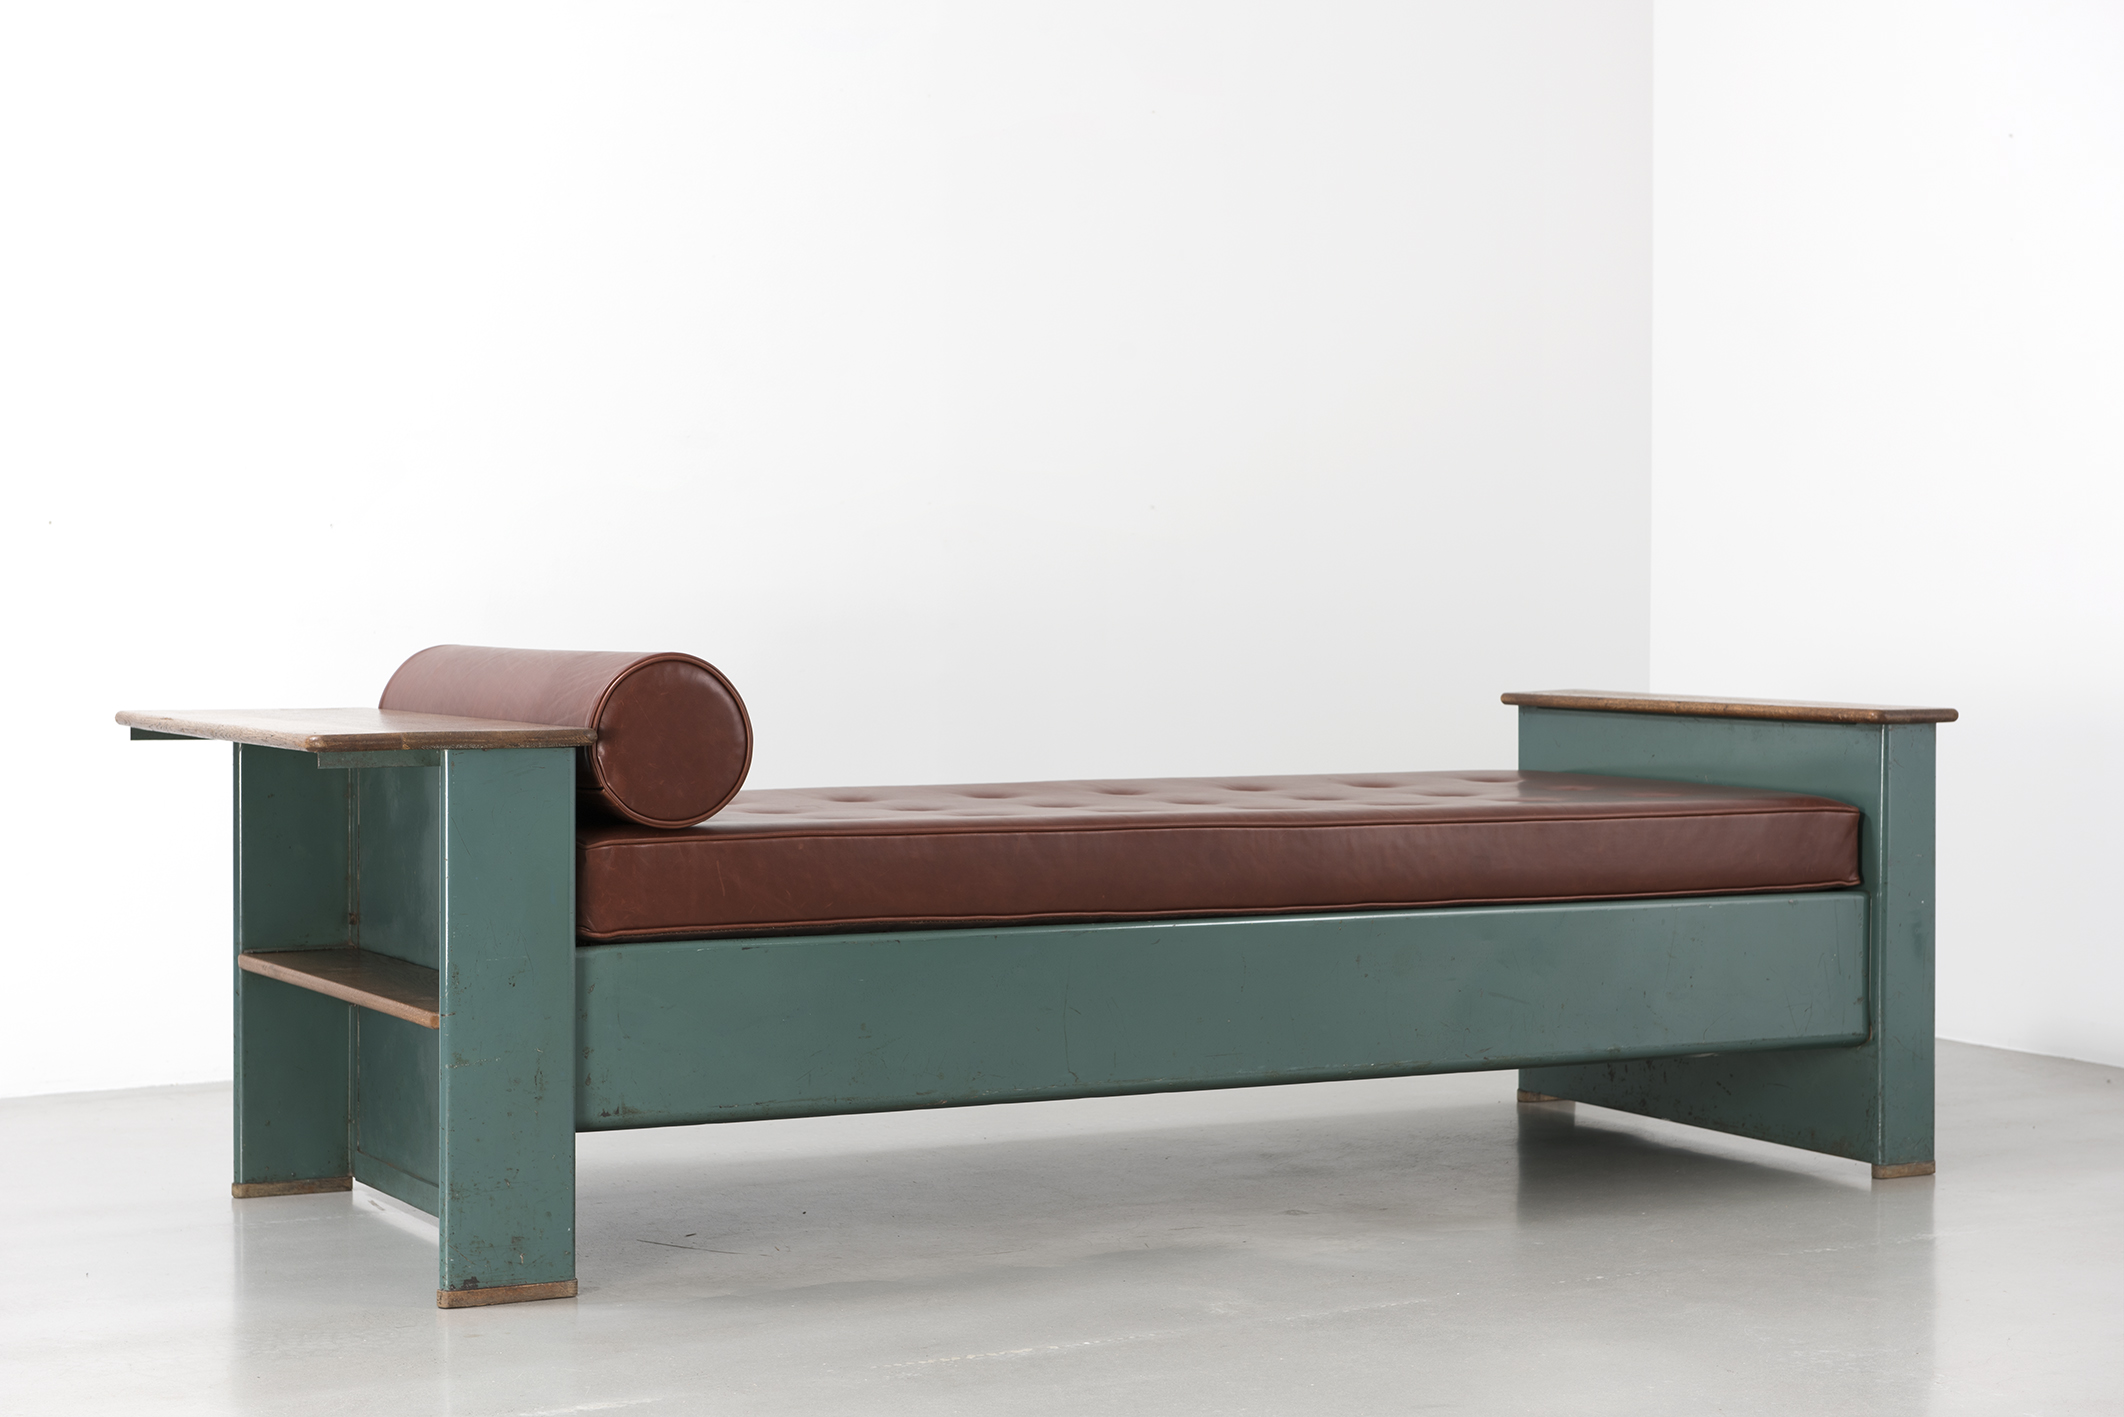 Bed no. 102, with bedhead forming a desk, 1936. Provenance: Boarding accommodations, Lycée Fabert, Metz.